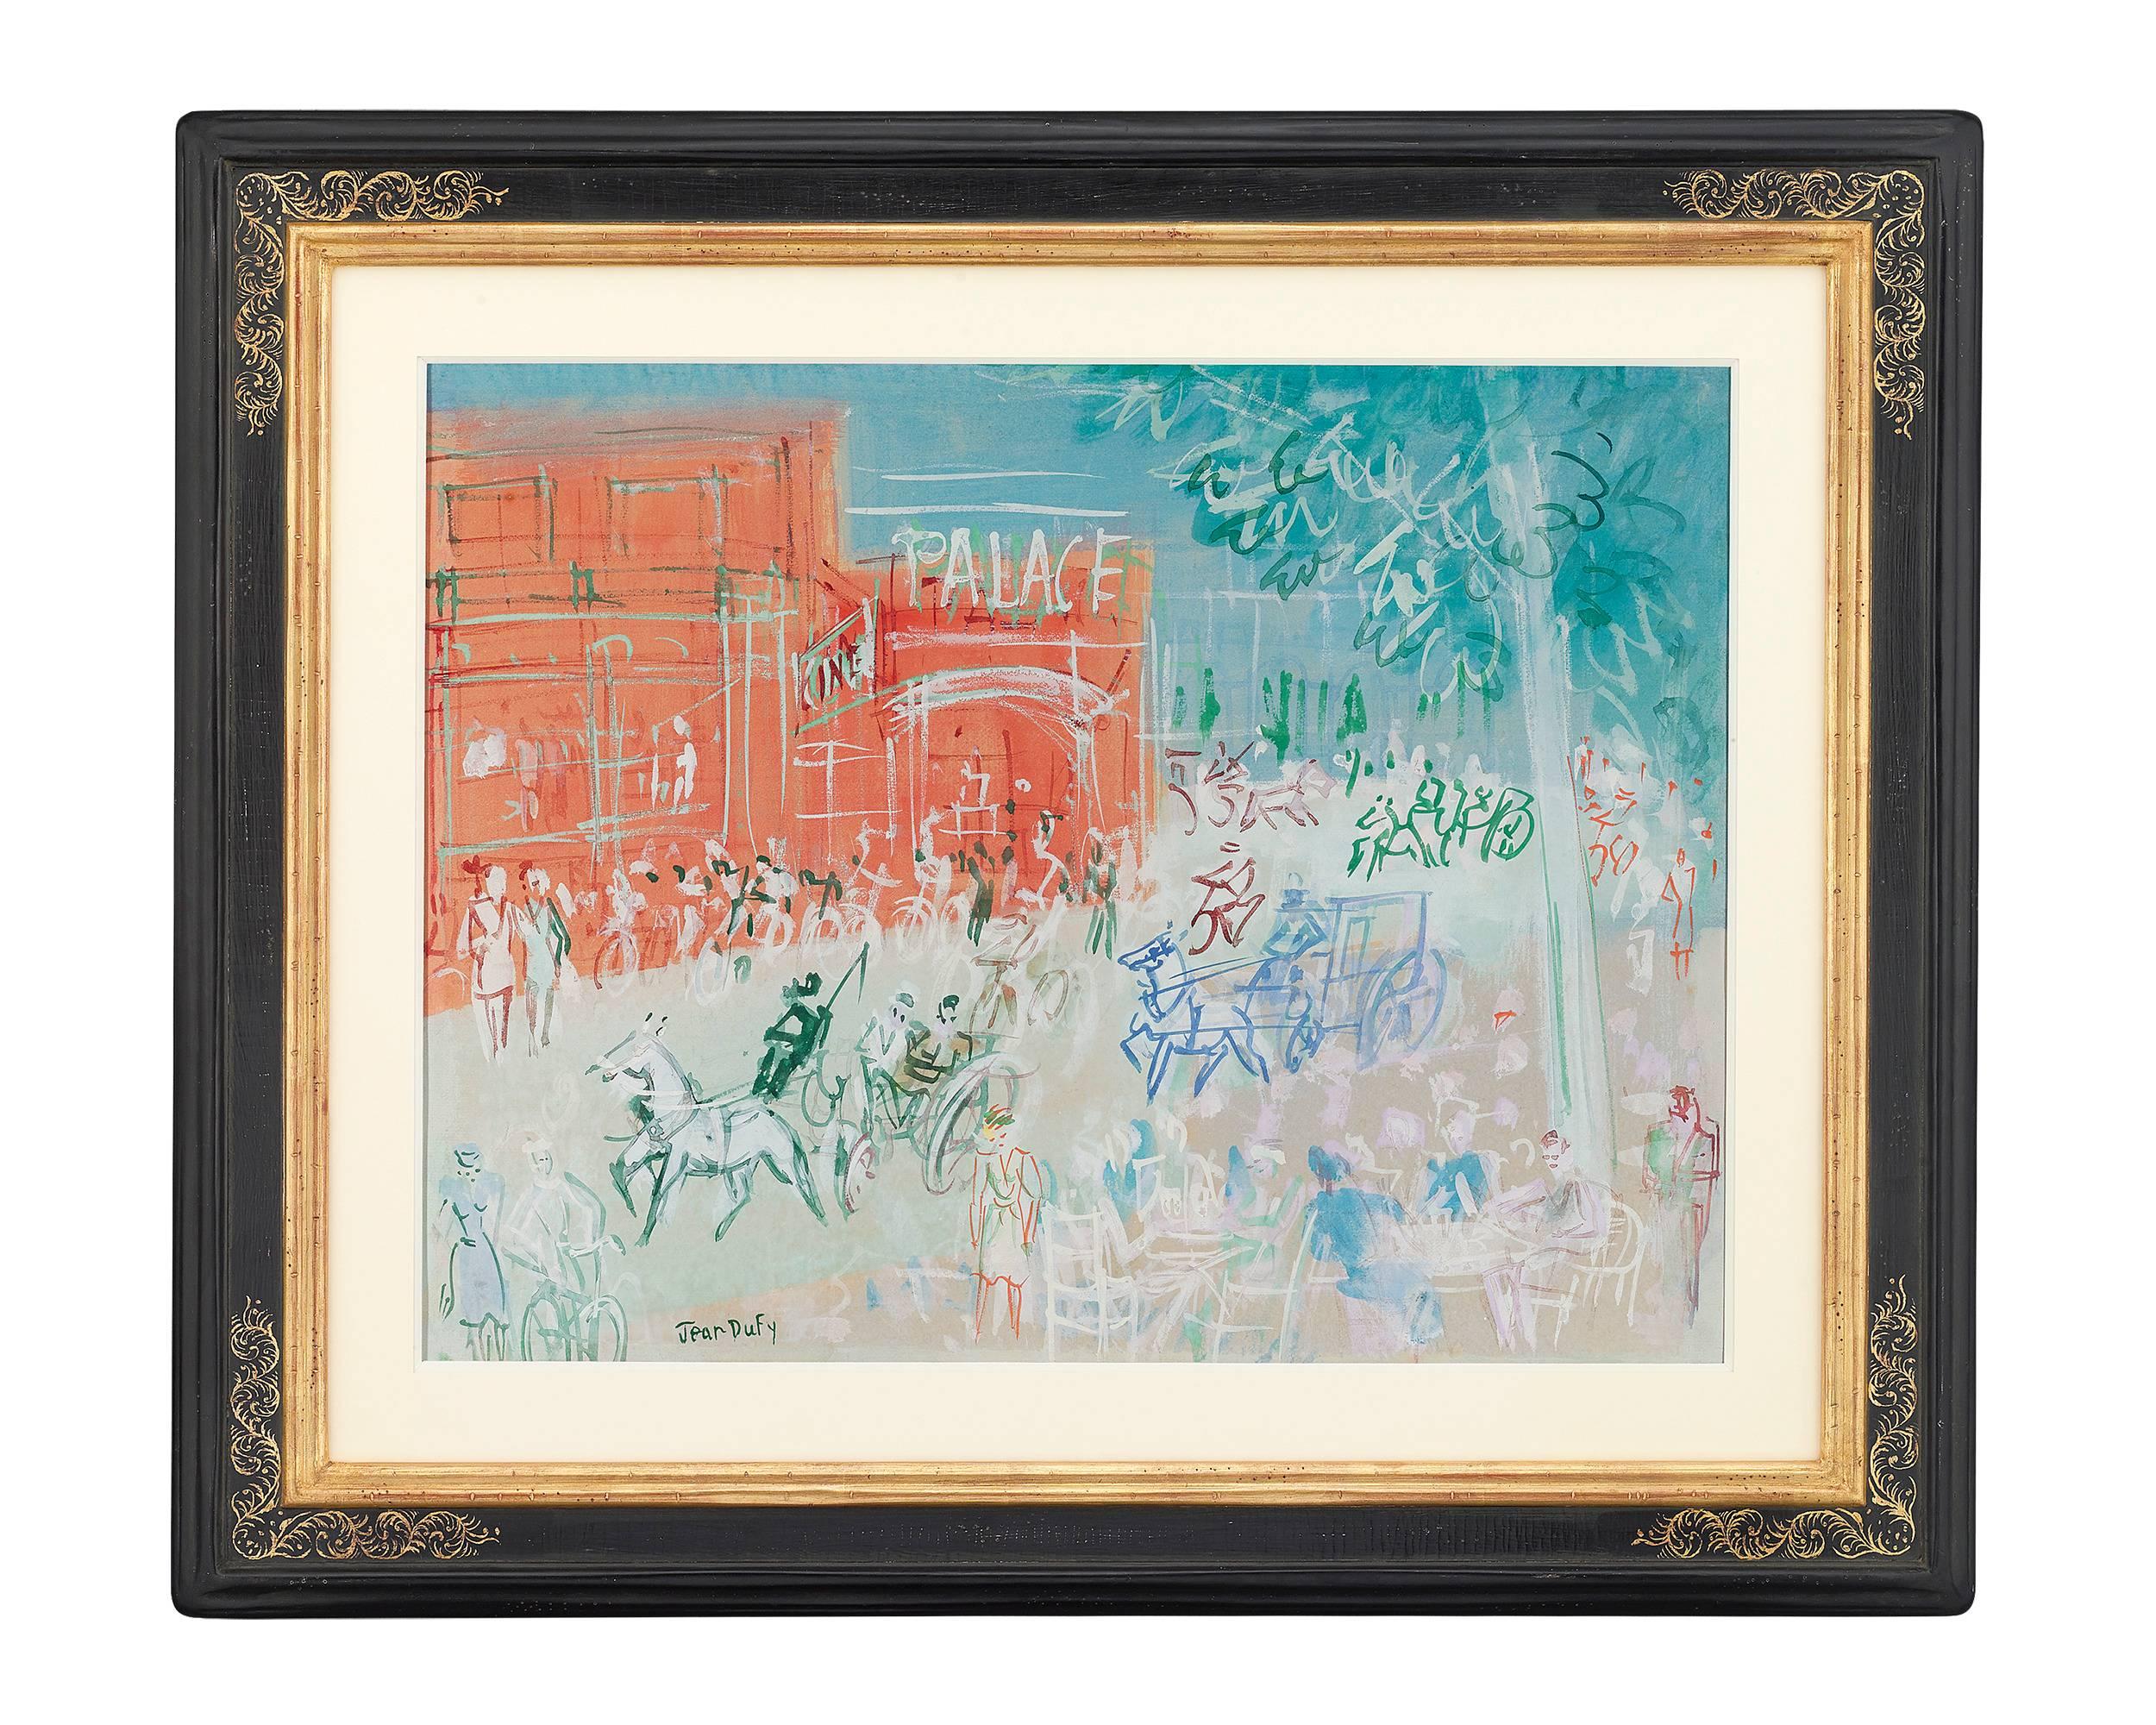 Le Palace by Jean Dufy 1